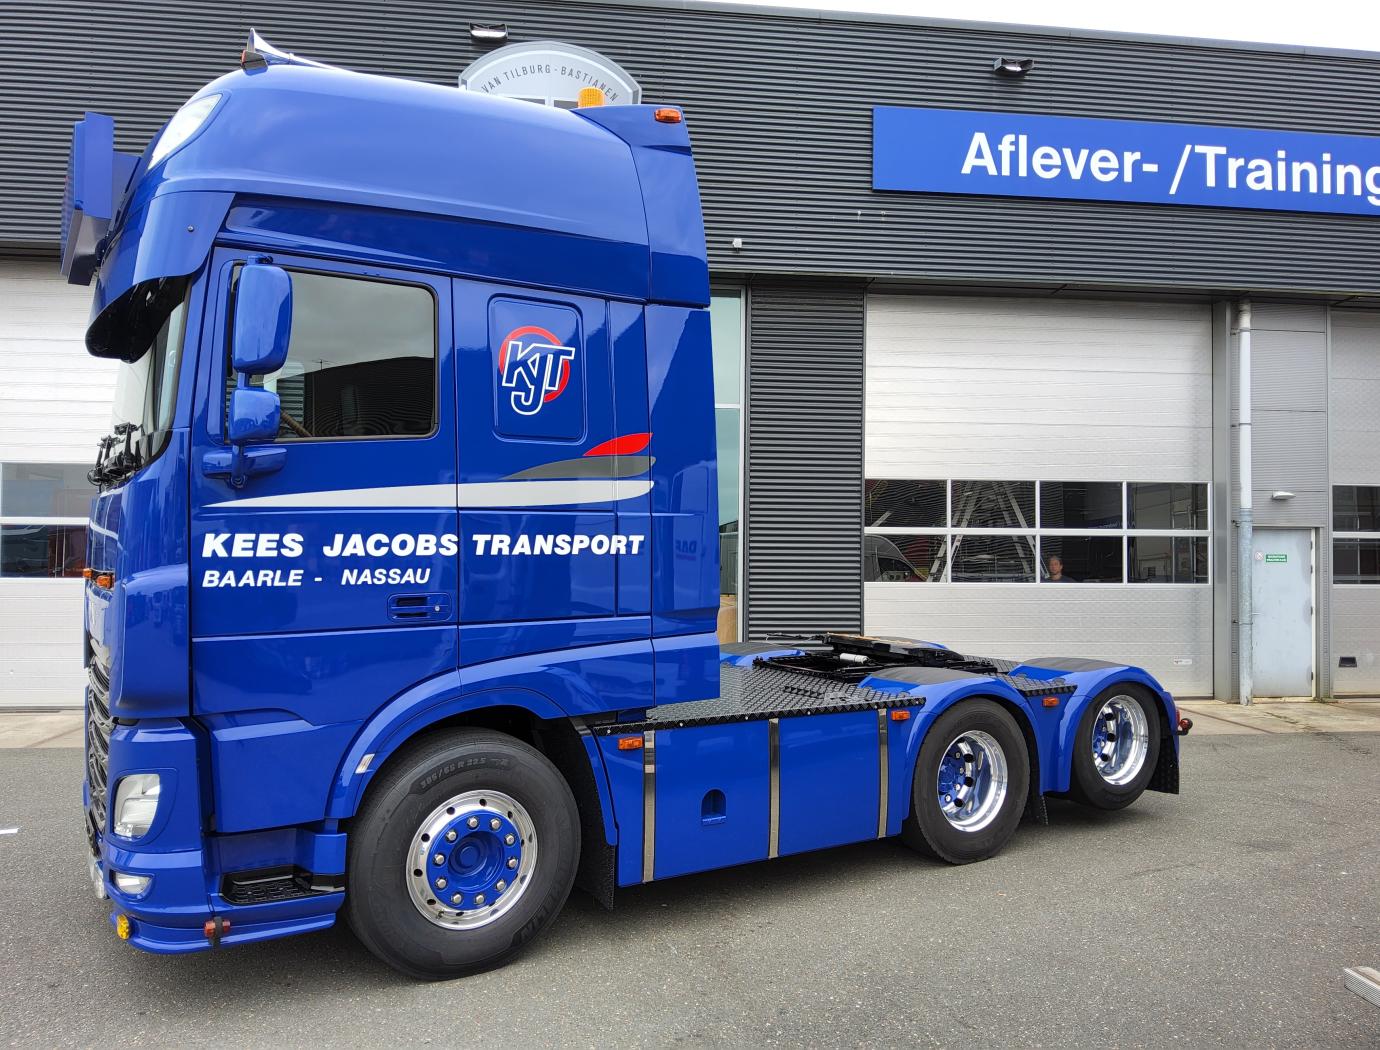 Kees Jacobs Transport